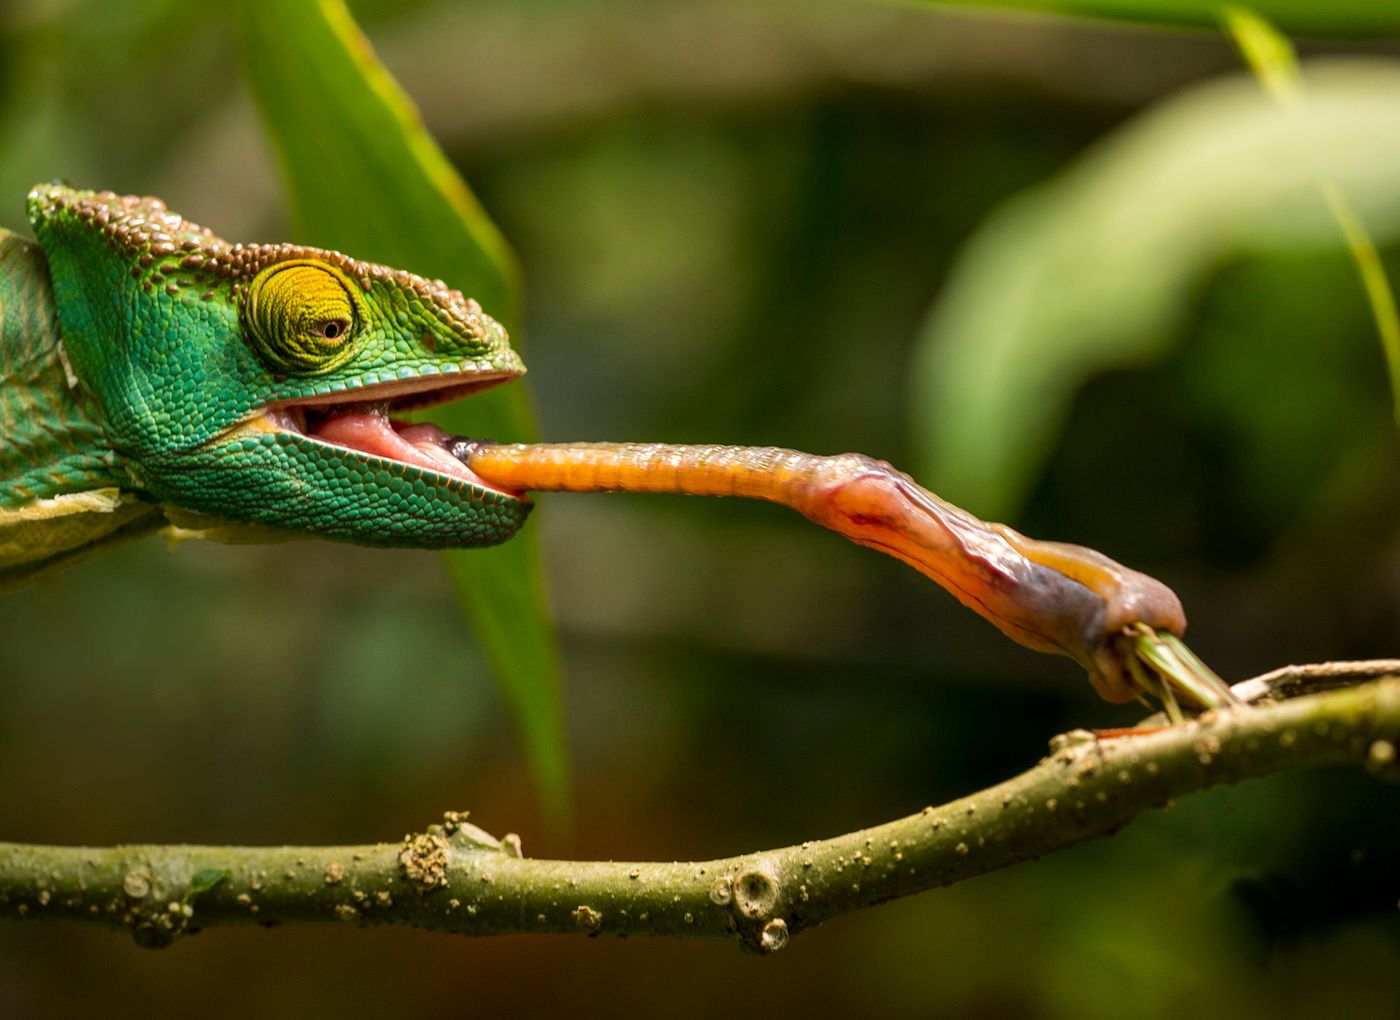 Chameleons don't have manners; they just fling their tongues to capture prey.